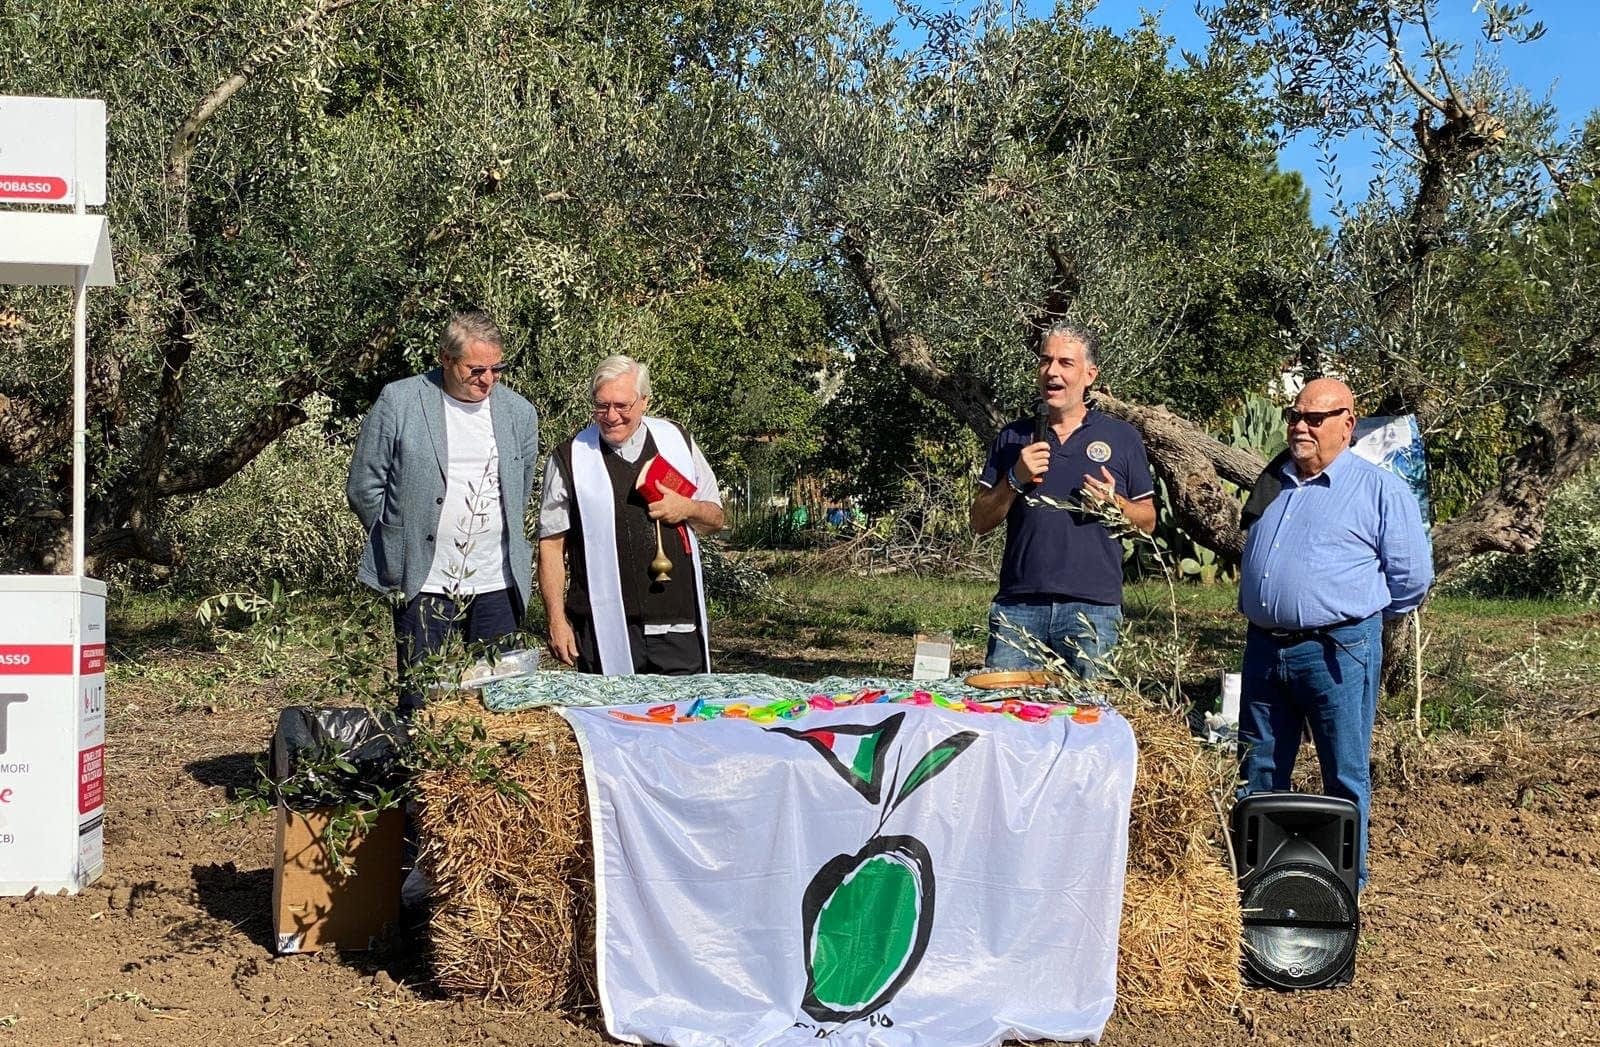 briefs-varieties-new-park-in-molise-promotes-olive-tree-biodiversity-social-inclusion-olive-oil-times